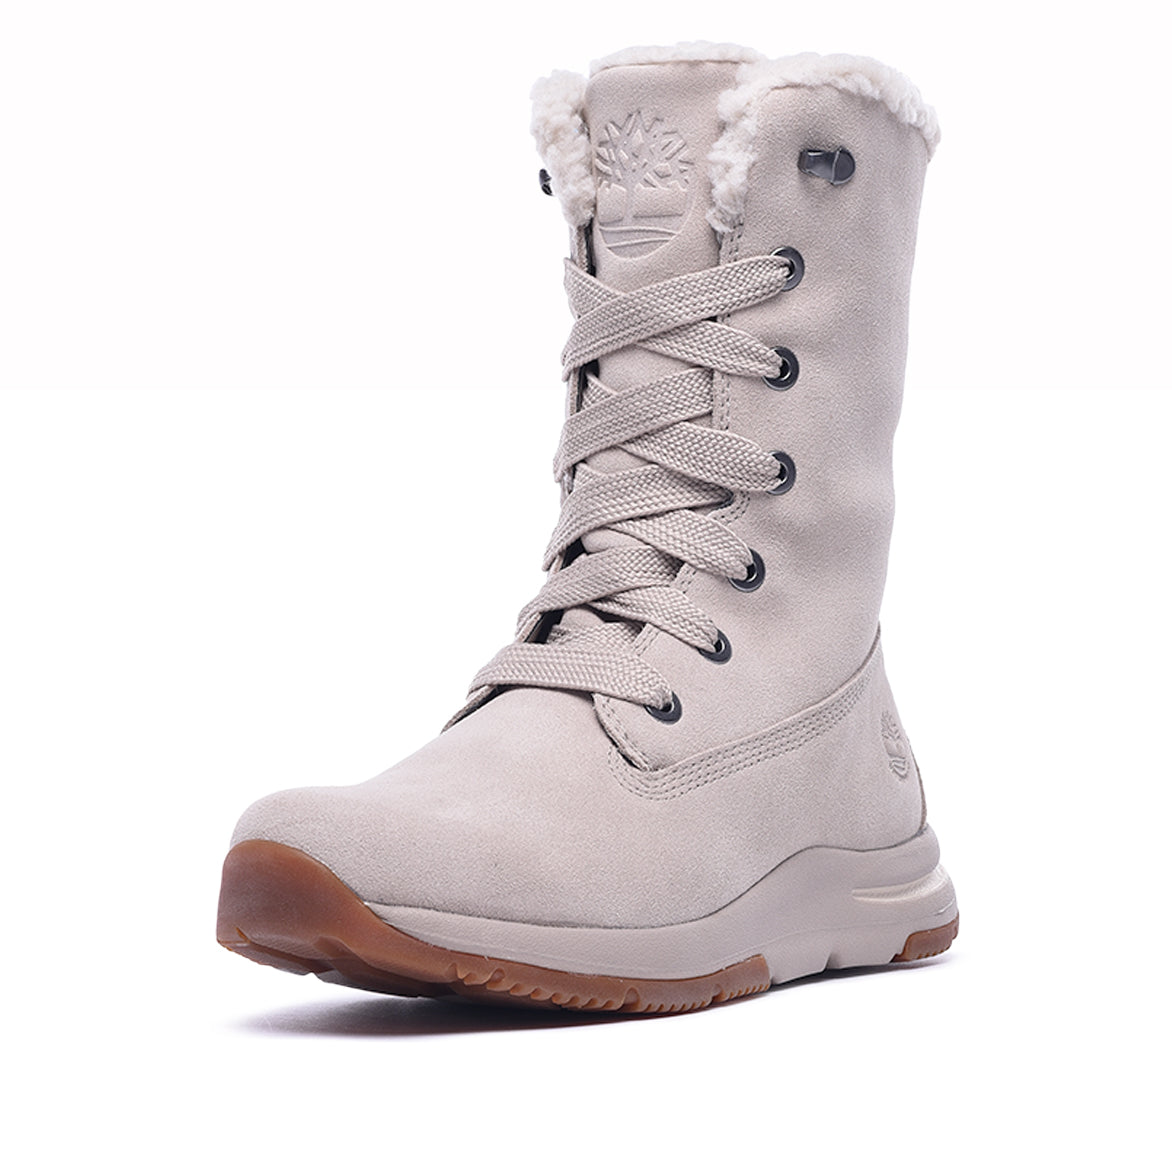 WMNS MABEL TOWN MID WATERPROOF BOOT - LIGHT TAUPE